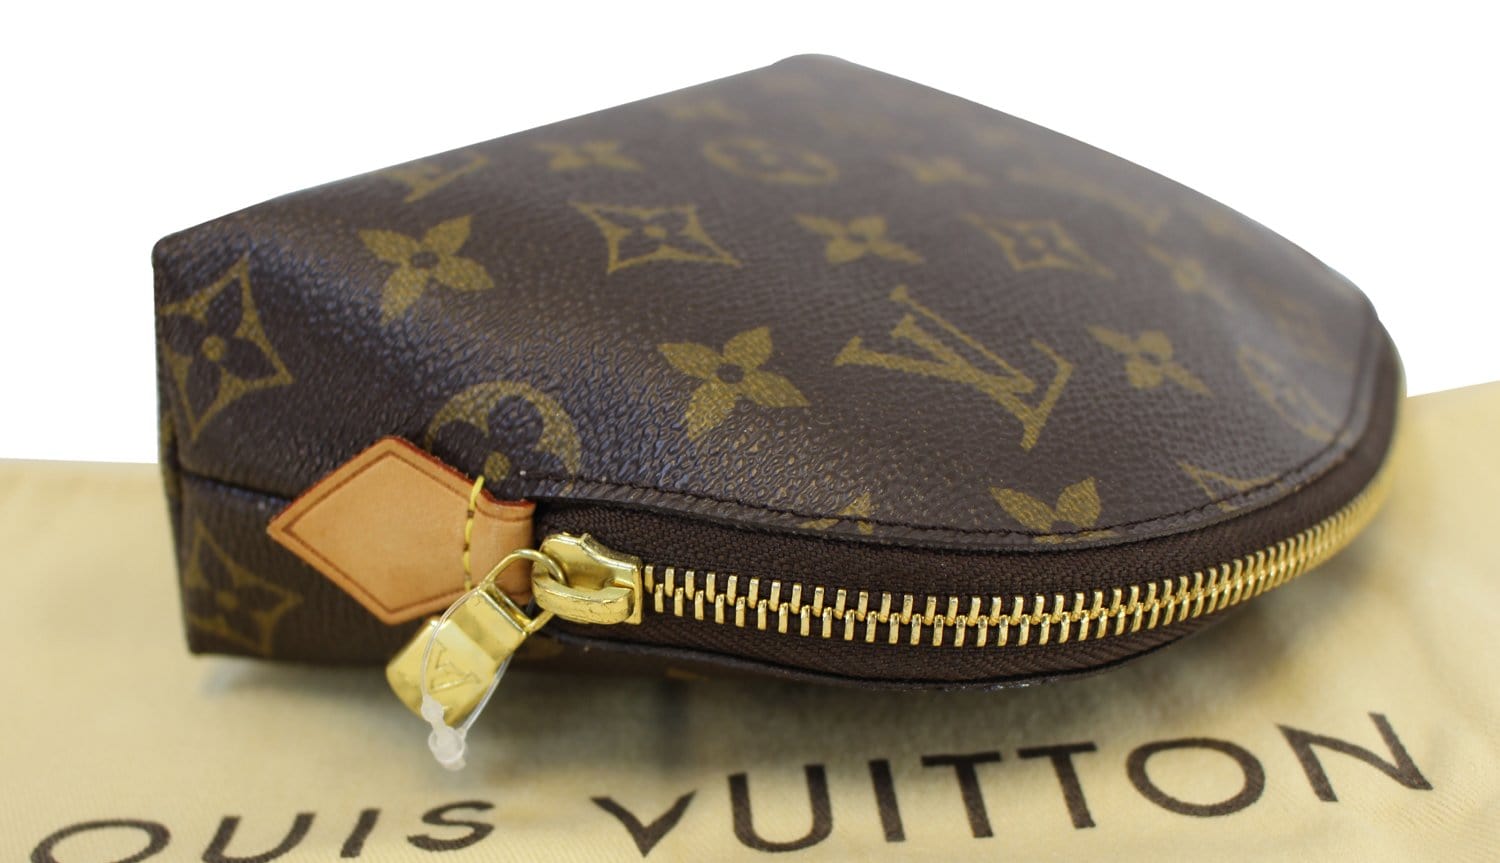 LOUIS VUITTON, GM COSMETIC POUCH